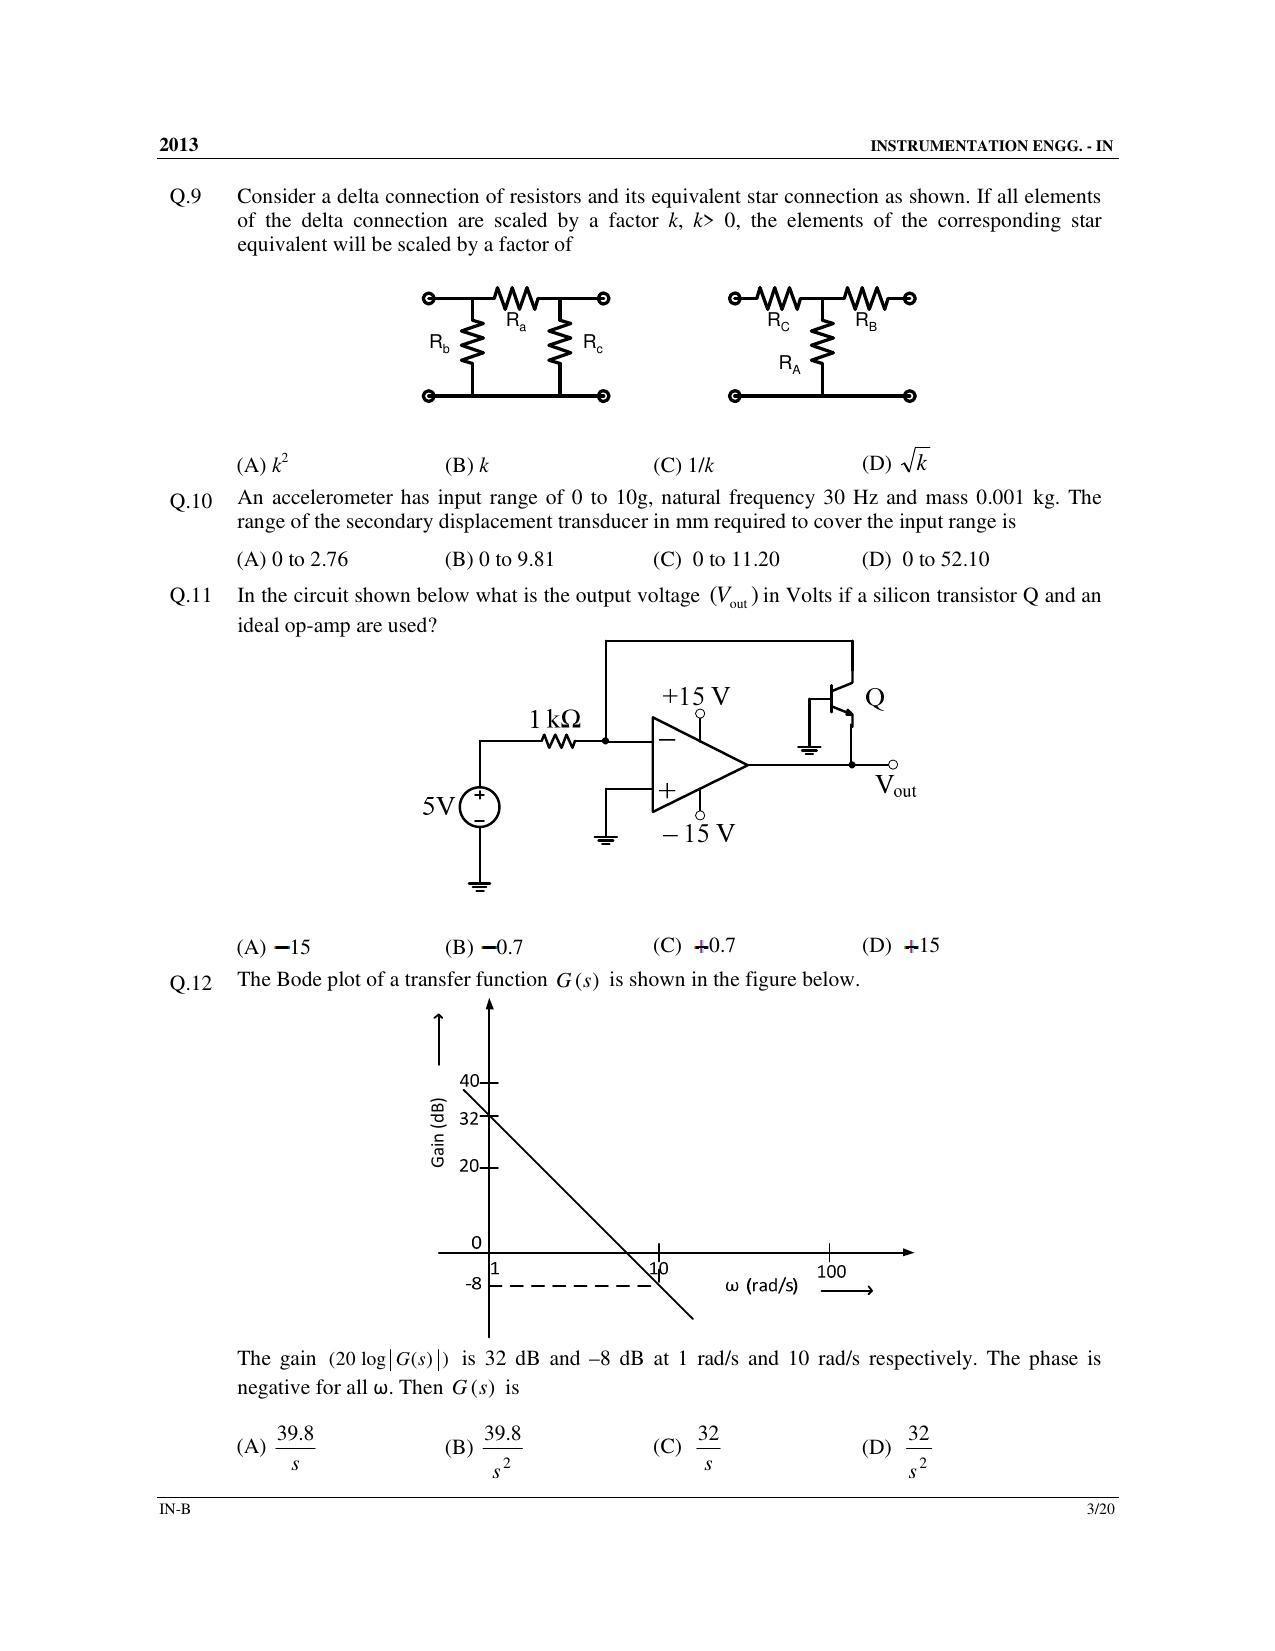 GATE 2013 Instrumentation Engineering (IN) Question Paper with Answer Key - Page 21